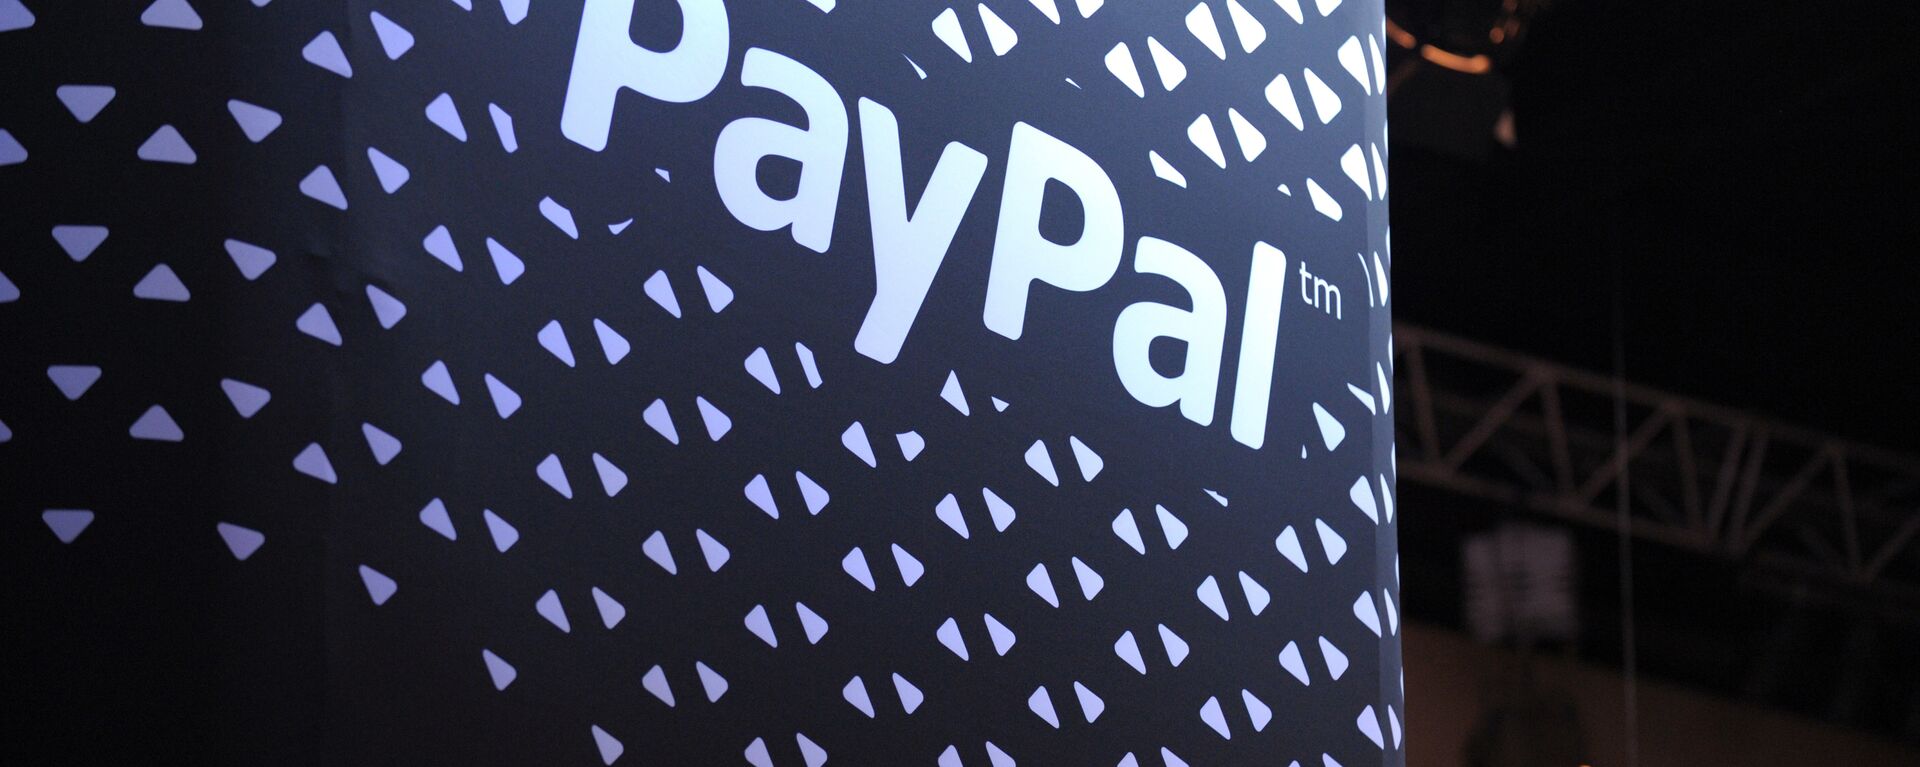 The logo of online payment company PayPal is pictured during LeWeb 2013 event in Saint-Denis near Paris on December 10, 2013 - Sputnik International, 1920, 03.05.2022